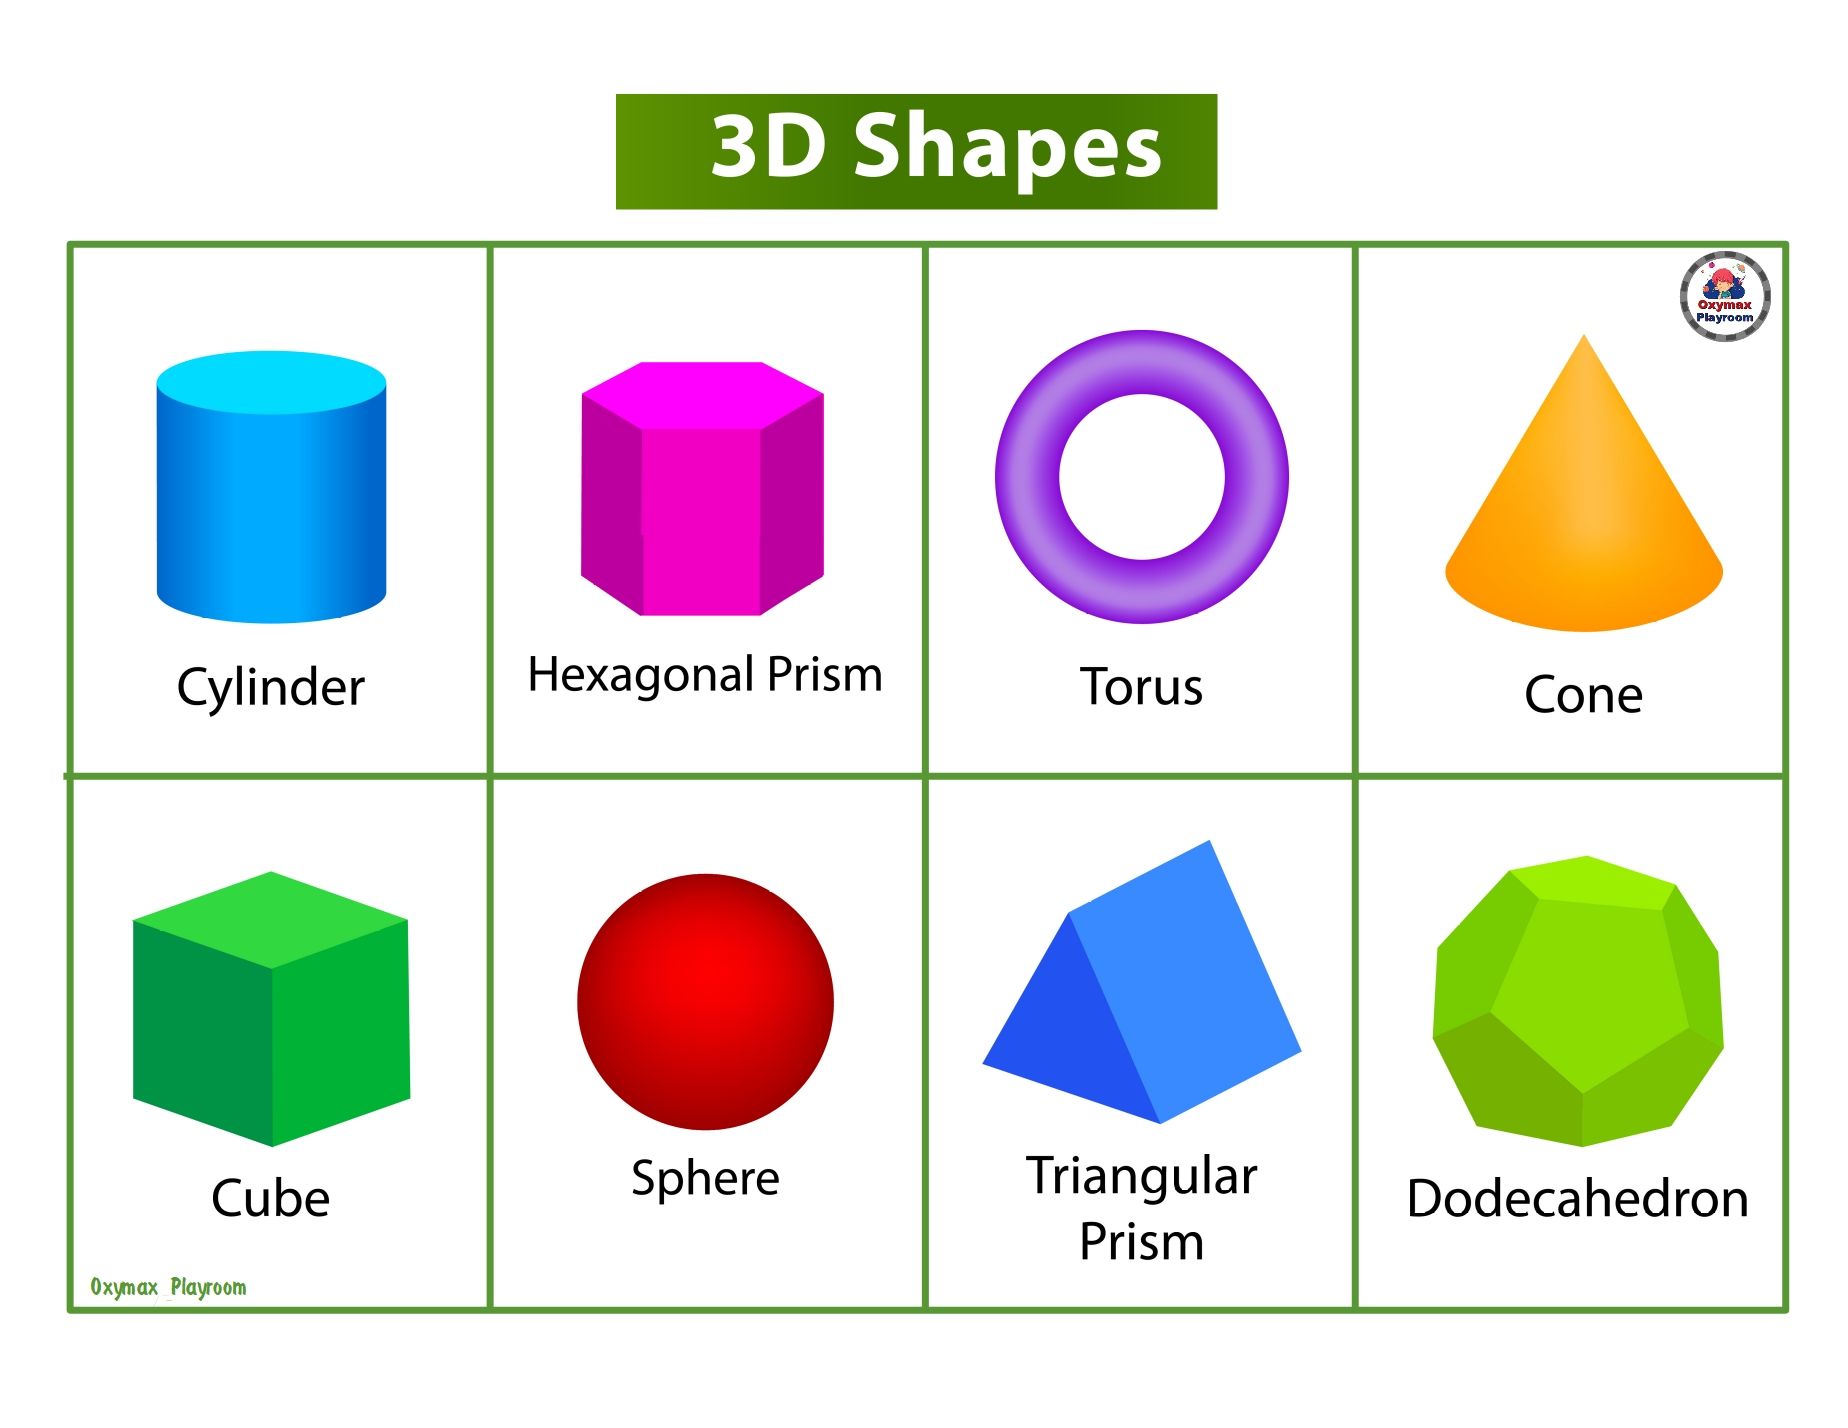 free-printable-3d-shapes